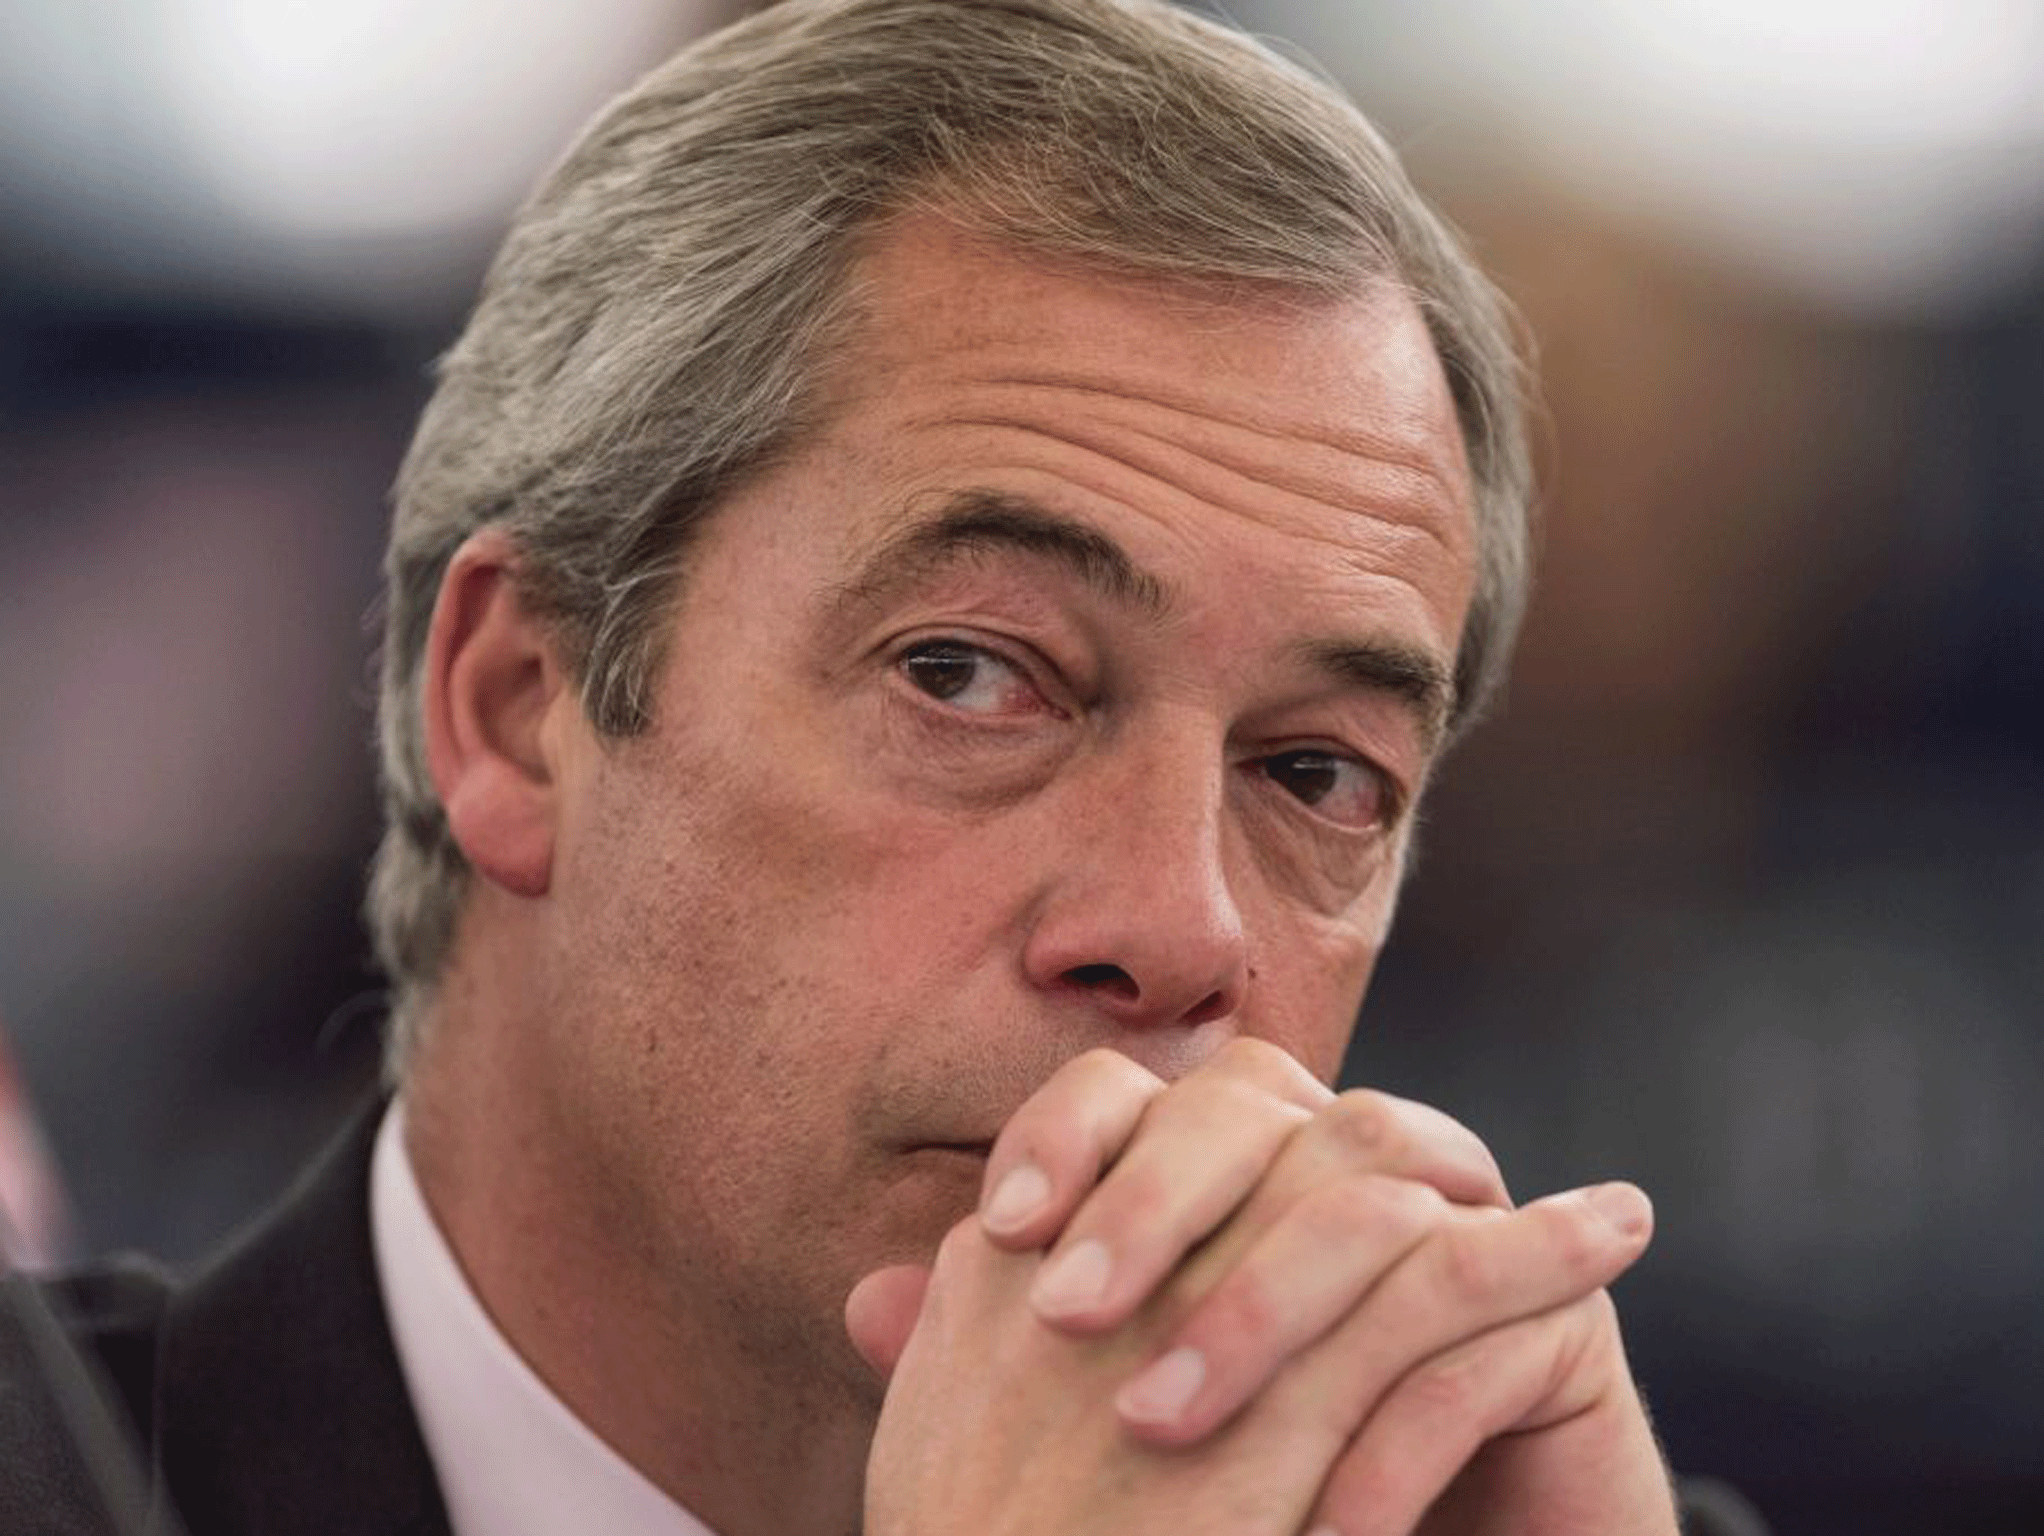 Nigel Farage is co-president of the Europe of Freedom and Direct Democracy, which entitles him to a security team